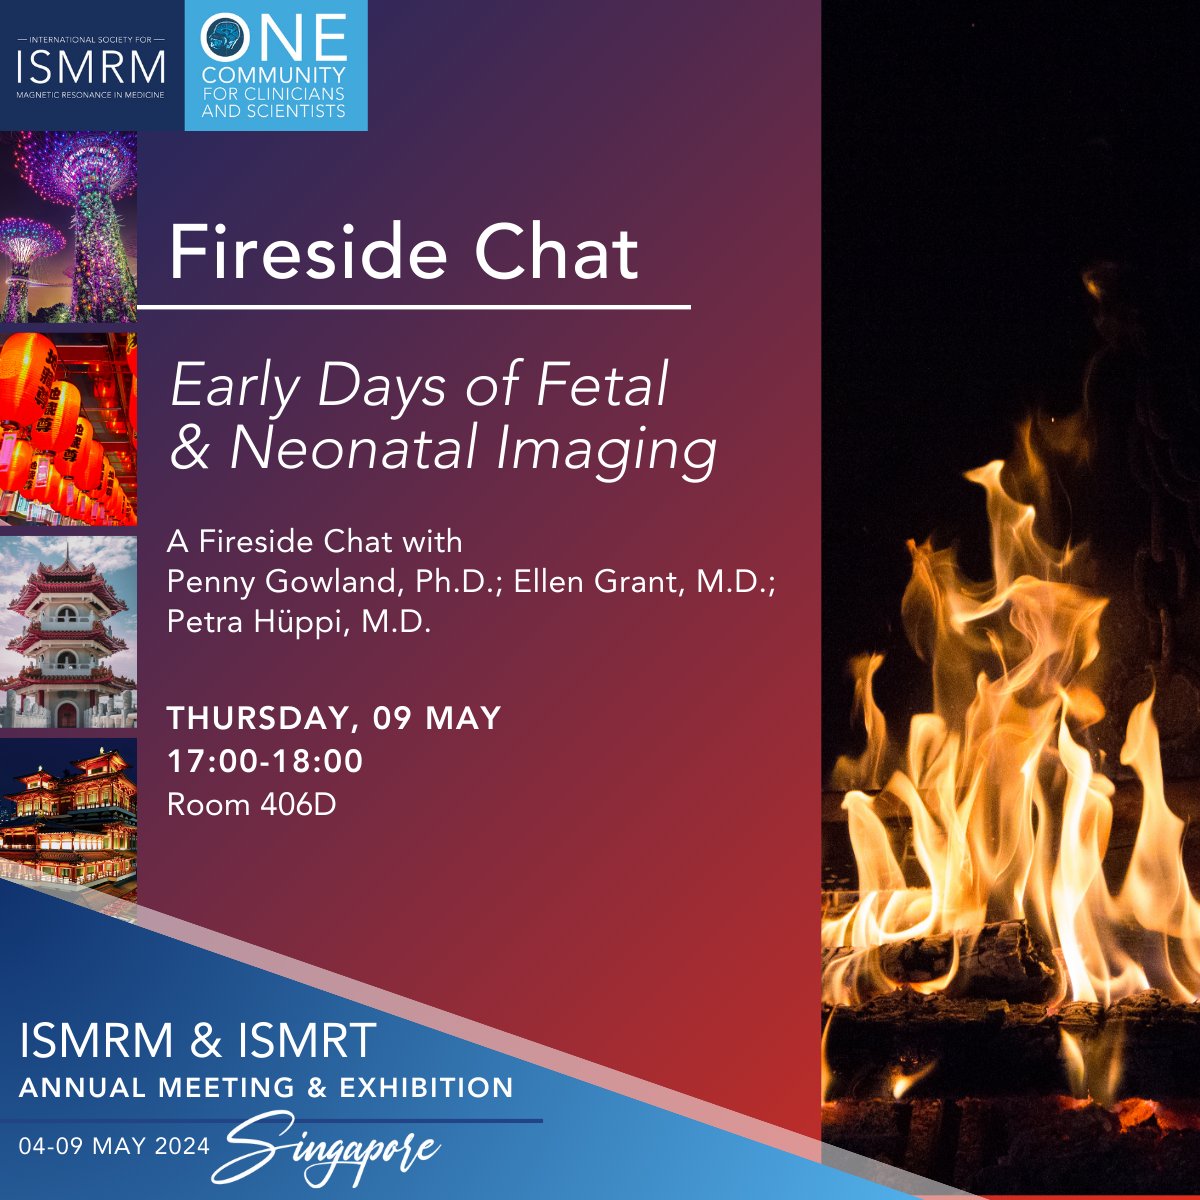 Don’t miss the opportunity to sit down with MR legends: Join us for the final 2024 Fireside Chat this evening at 17:00 in room 406D! Learn more: ow.ly/JTyj50RzOmE #ISMRM2024 #ISMRT2024 #ISMRM #ISMRT #MRI #MR #MagneticResonance #Singapore